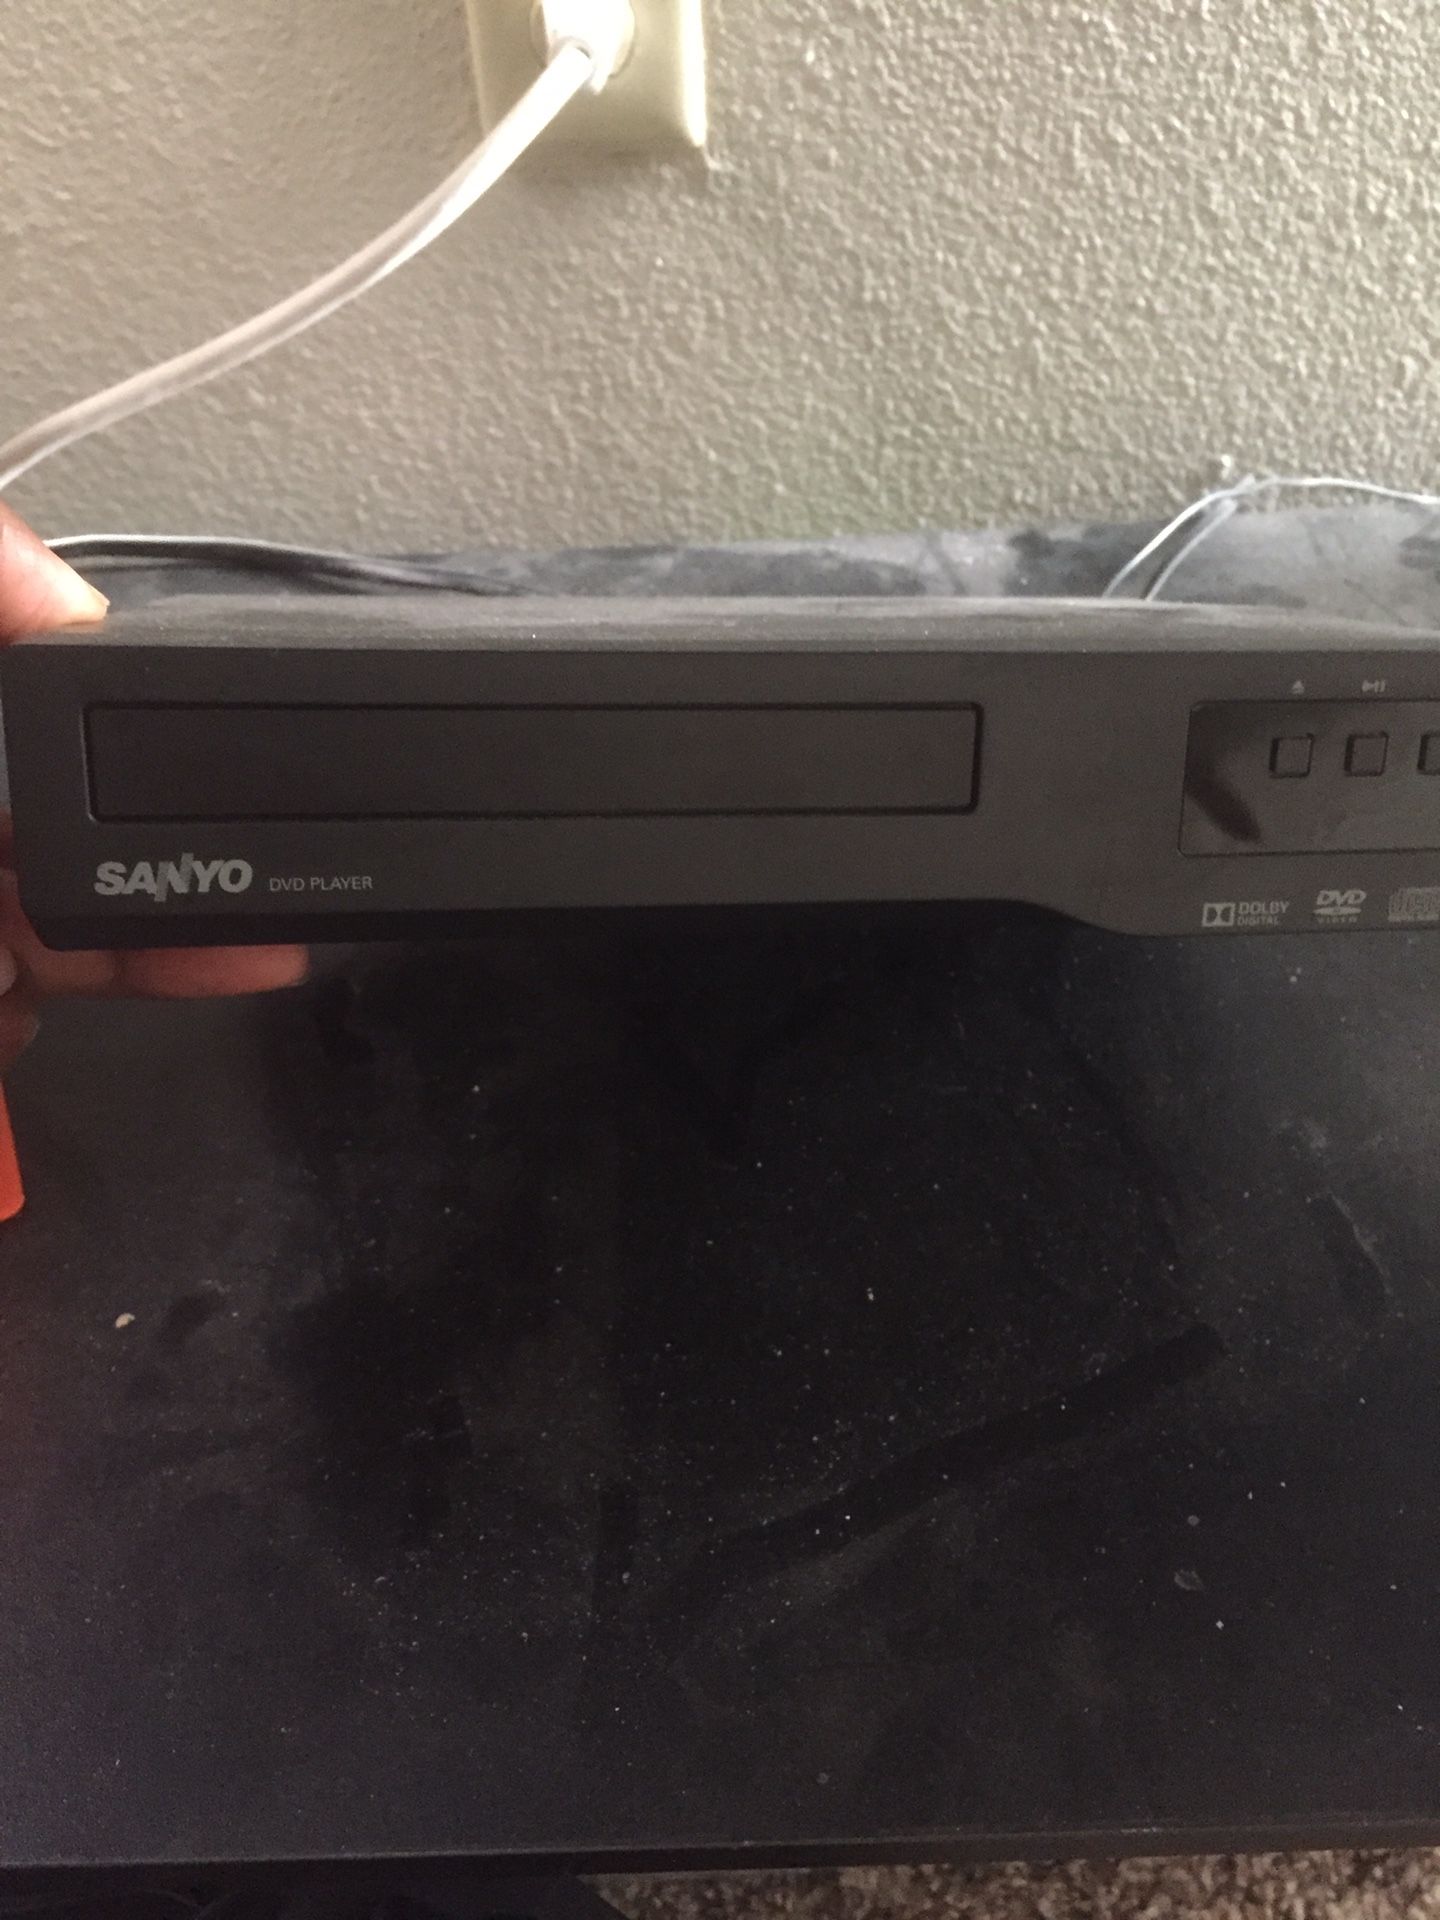 DVD player in great condition